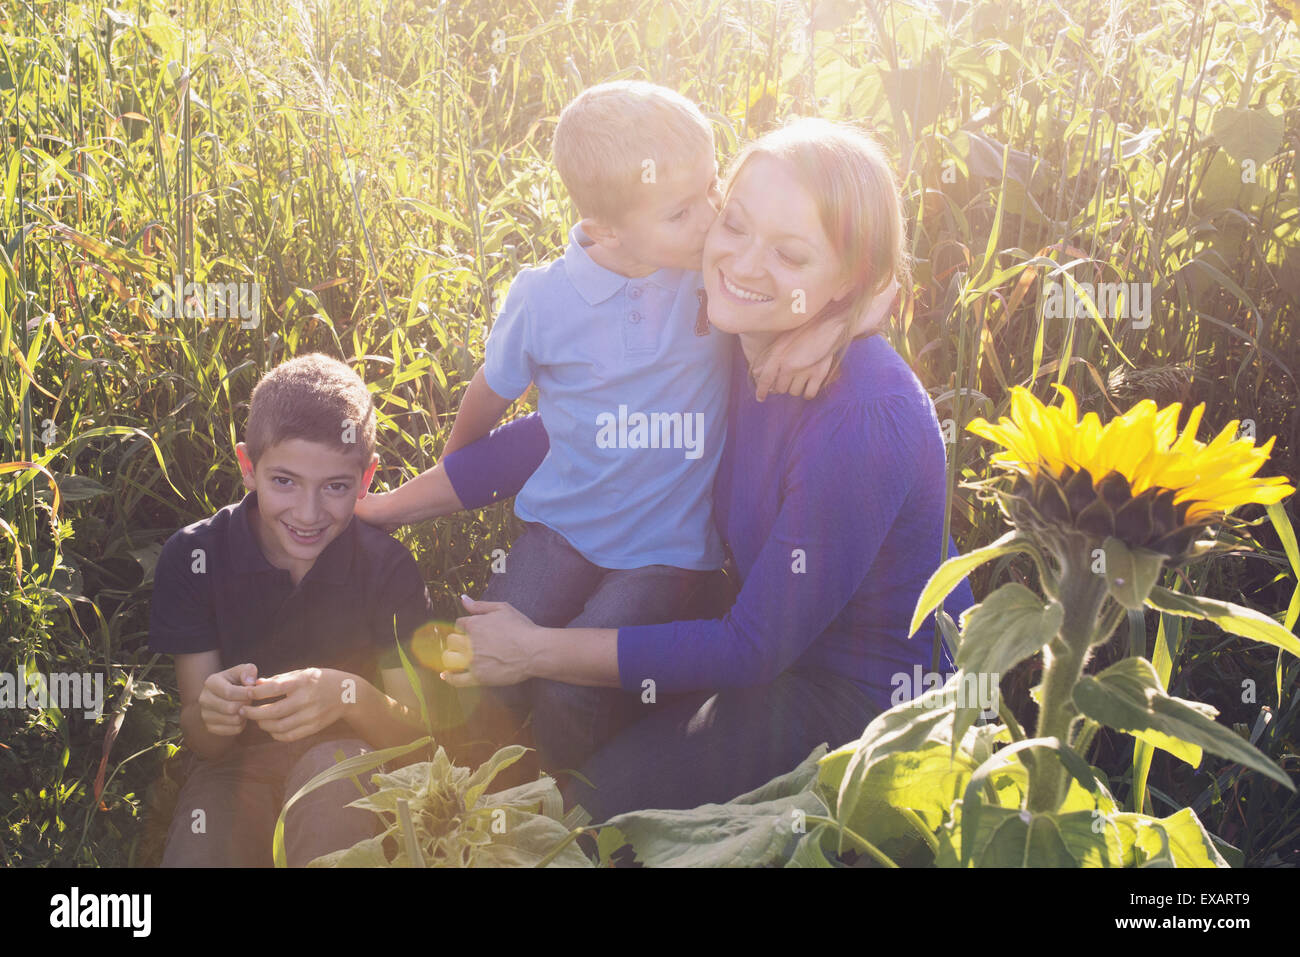 Mother and young sons spending time together in field of sunflowers Stock Photo